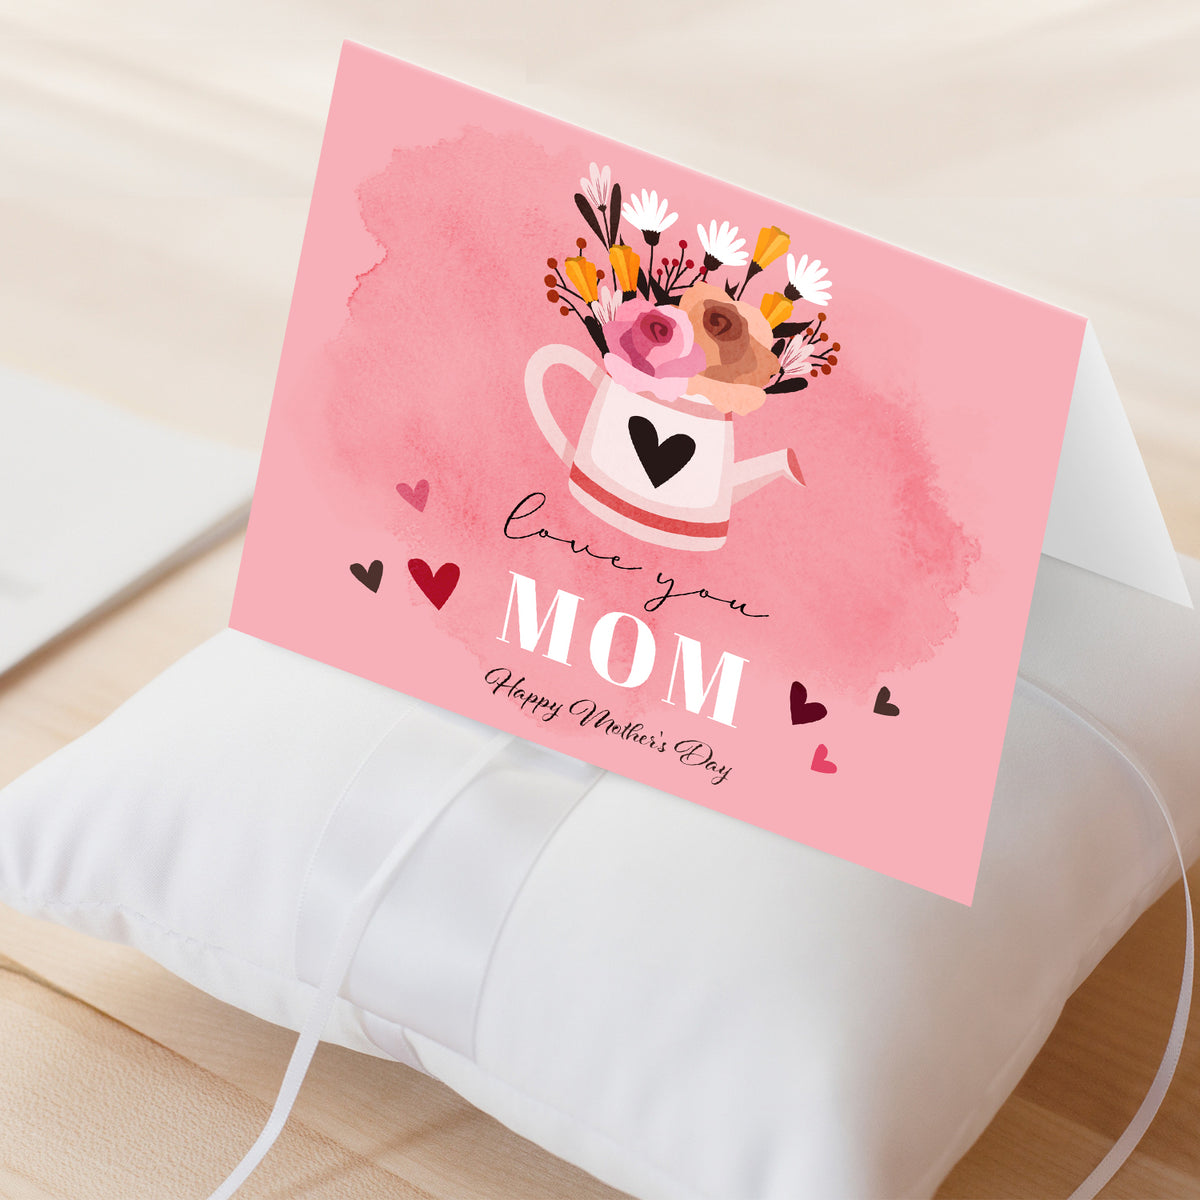 Love You Mom, Happy Mother's Day – Appreciation Thank You Greeting Cards and Envelopes for Mom, Wife | 4.25 x 5.5 | 10 per Pack